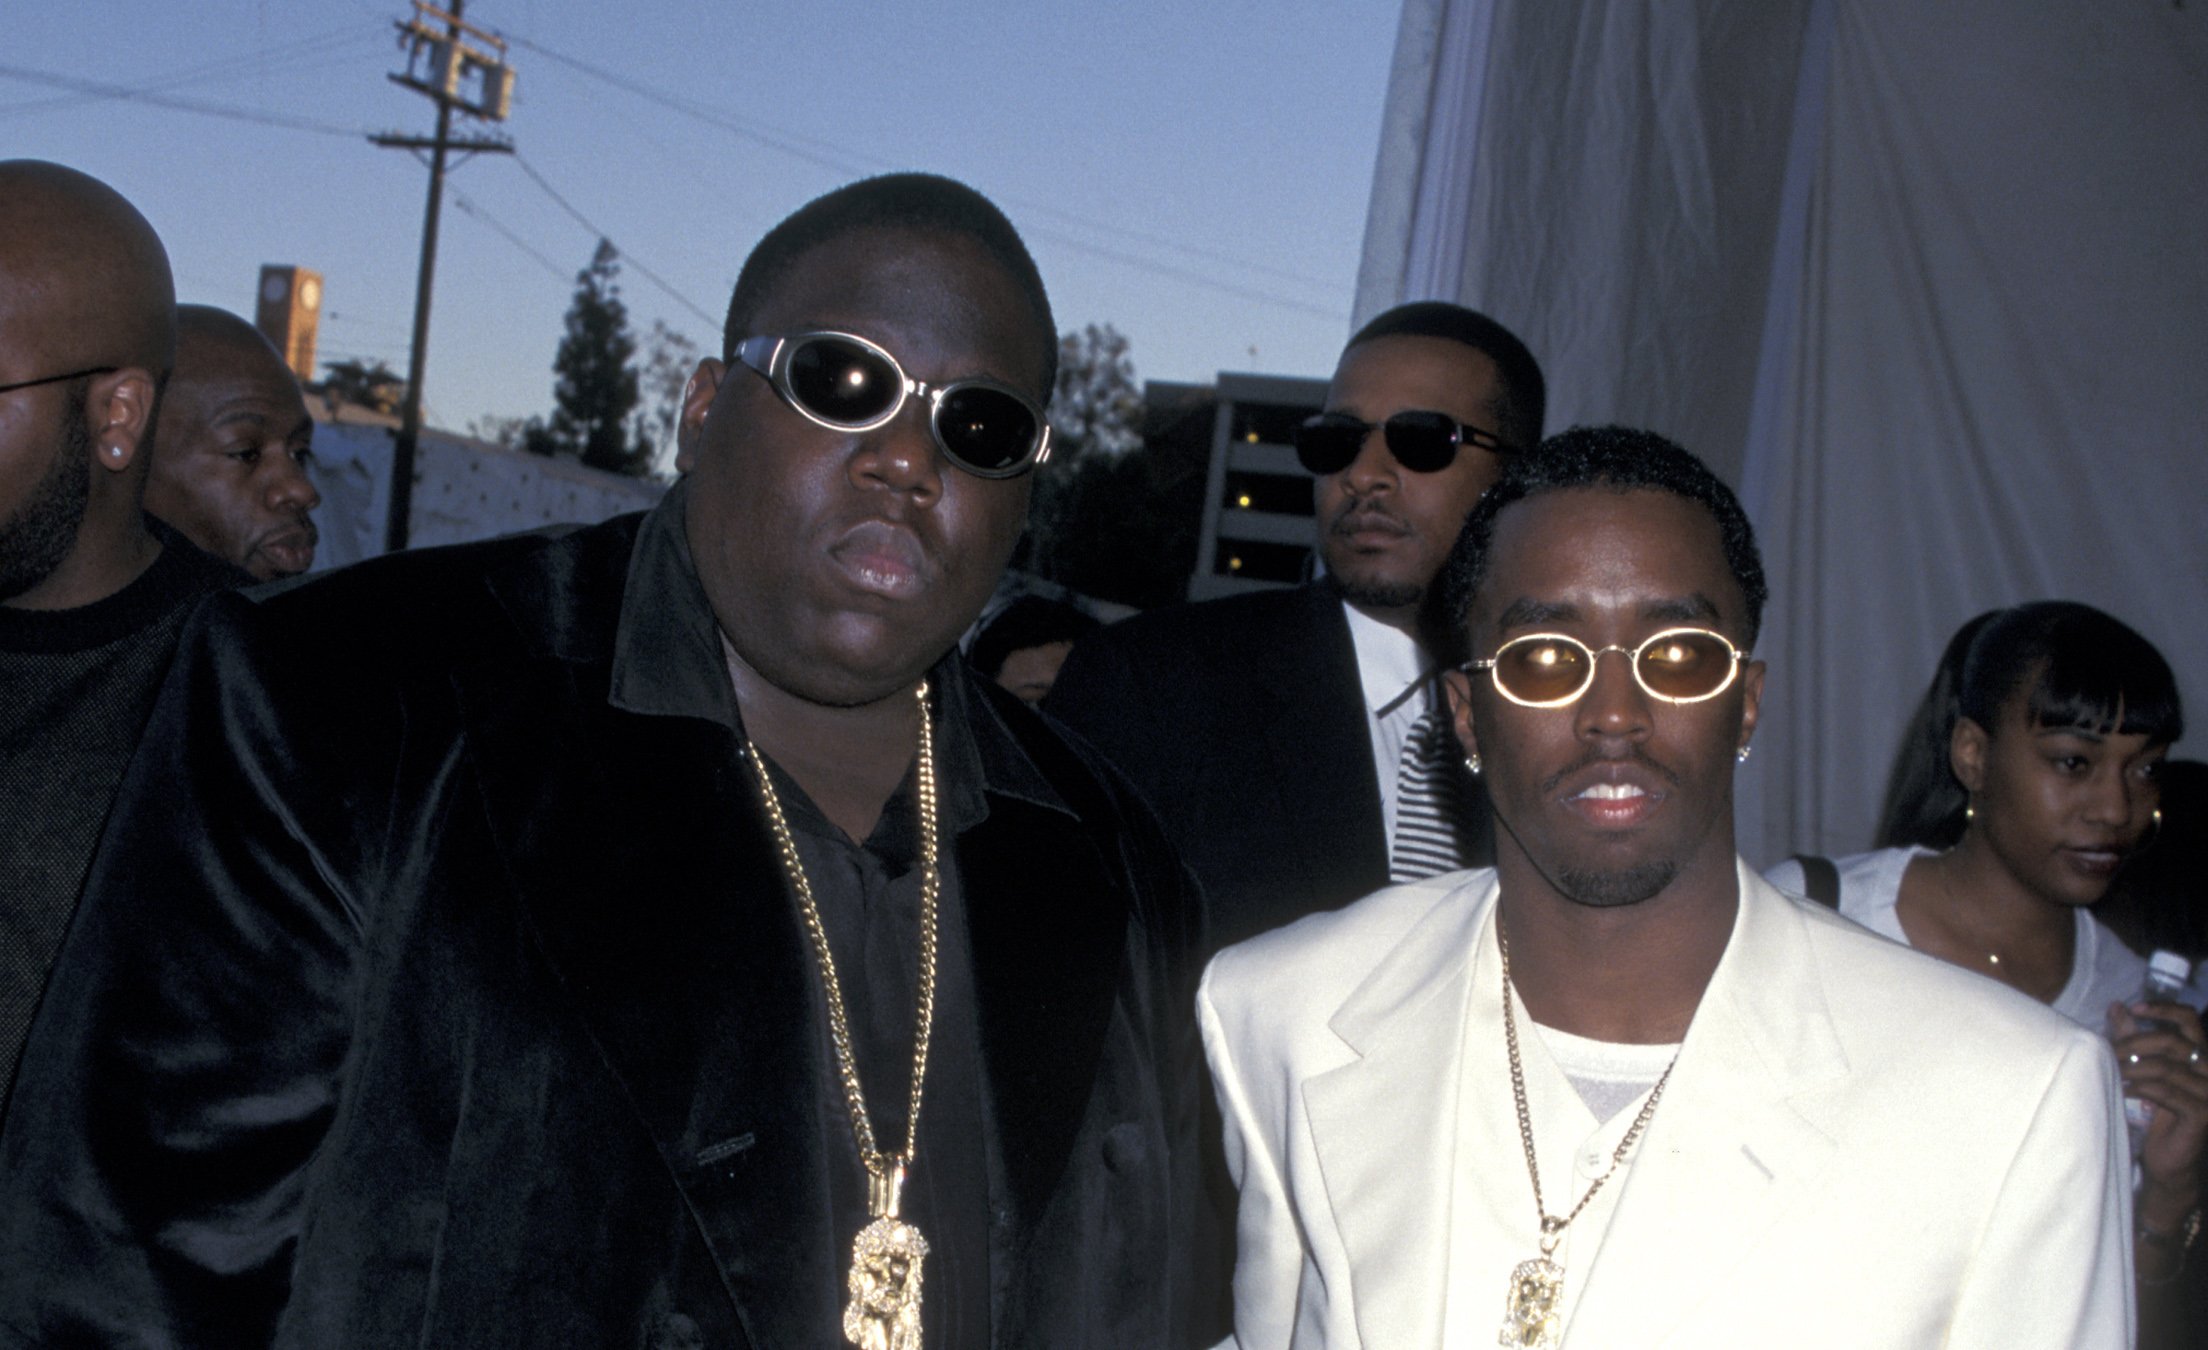 The Notorious B.I.G. and Sean "P. Diddy" Combs, the orchestrators behind Biggie's song 'One More Chance' posing for a photo together